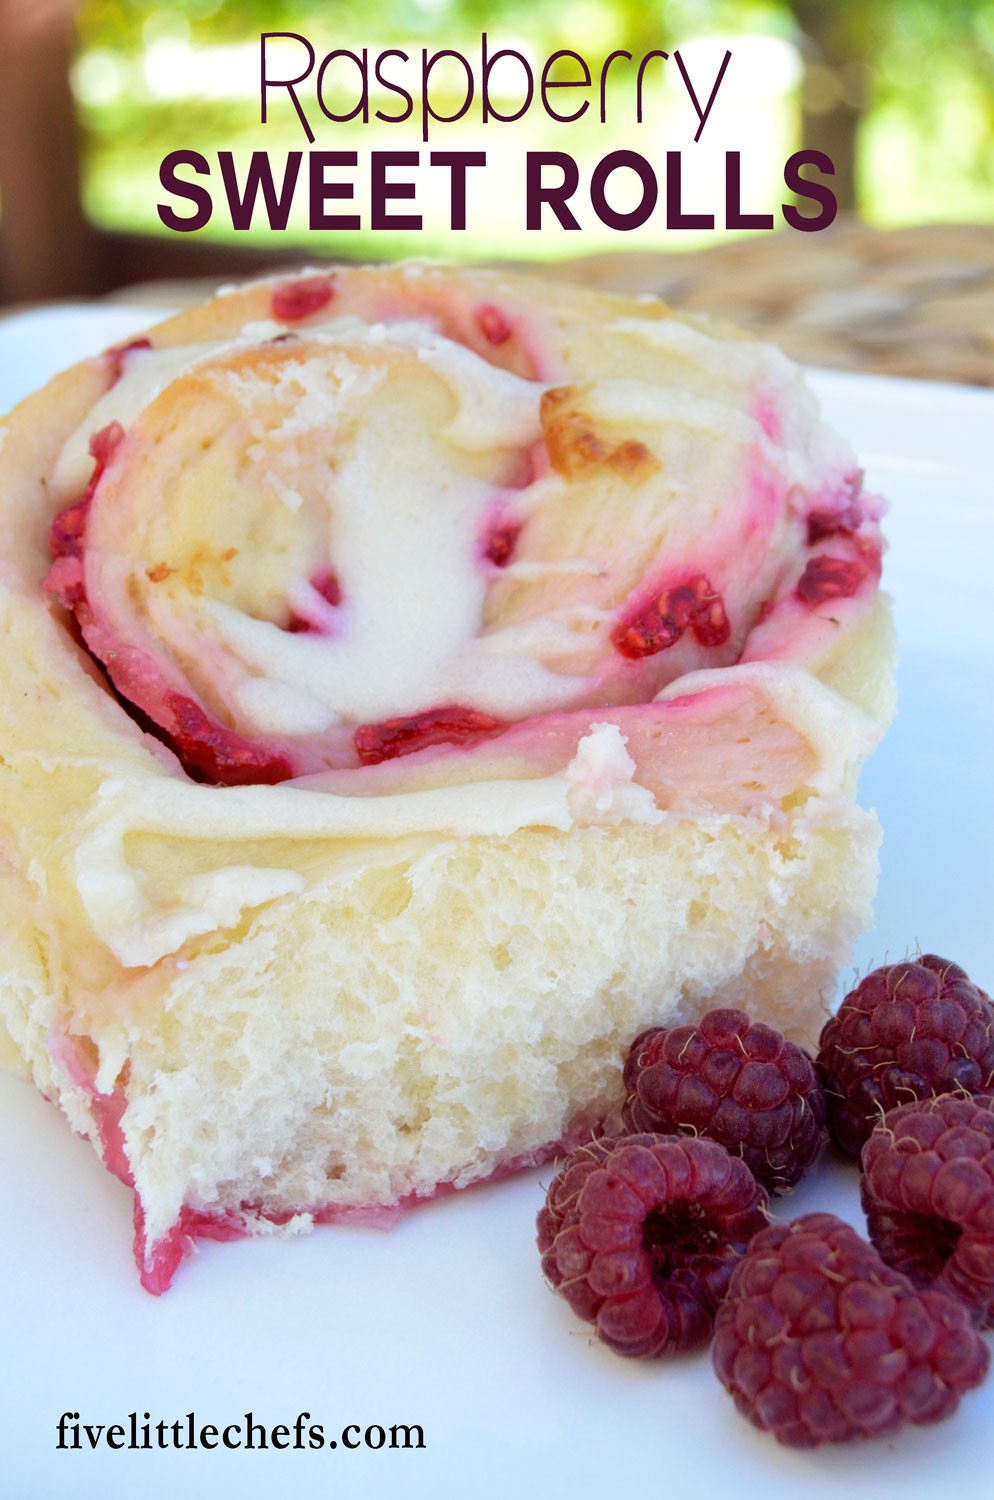 Soft and fluffy Raspberry Sweet Rolls are filled with juicy raspberries and topped with a cream cheese glaze. Bake for special occasions or to impress guests.